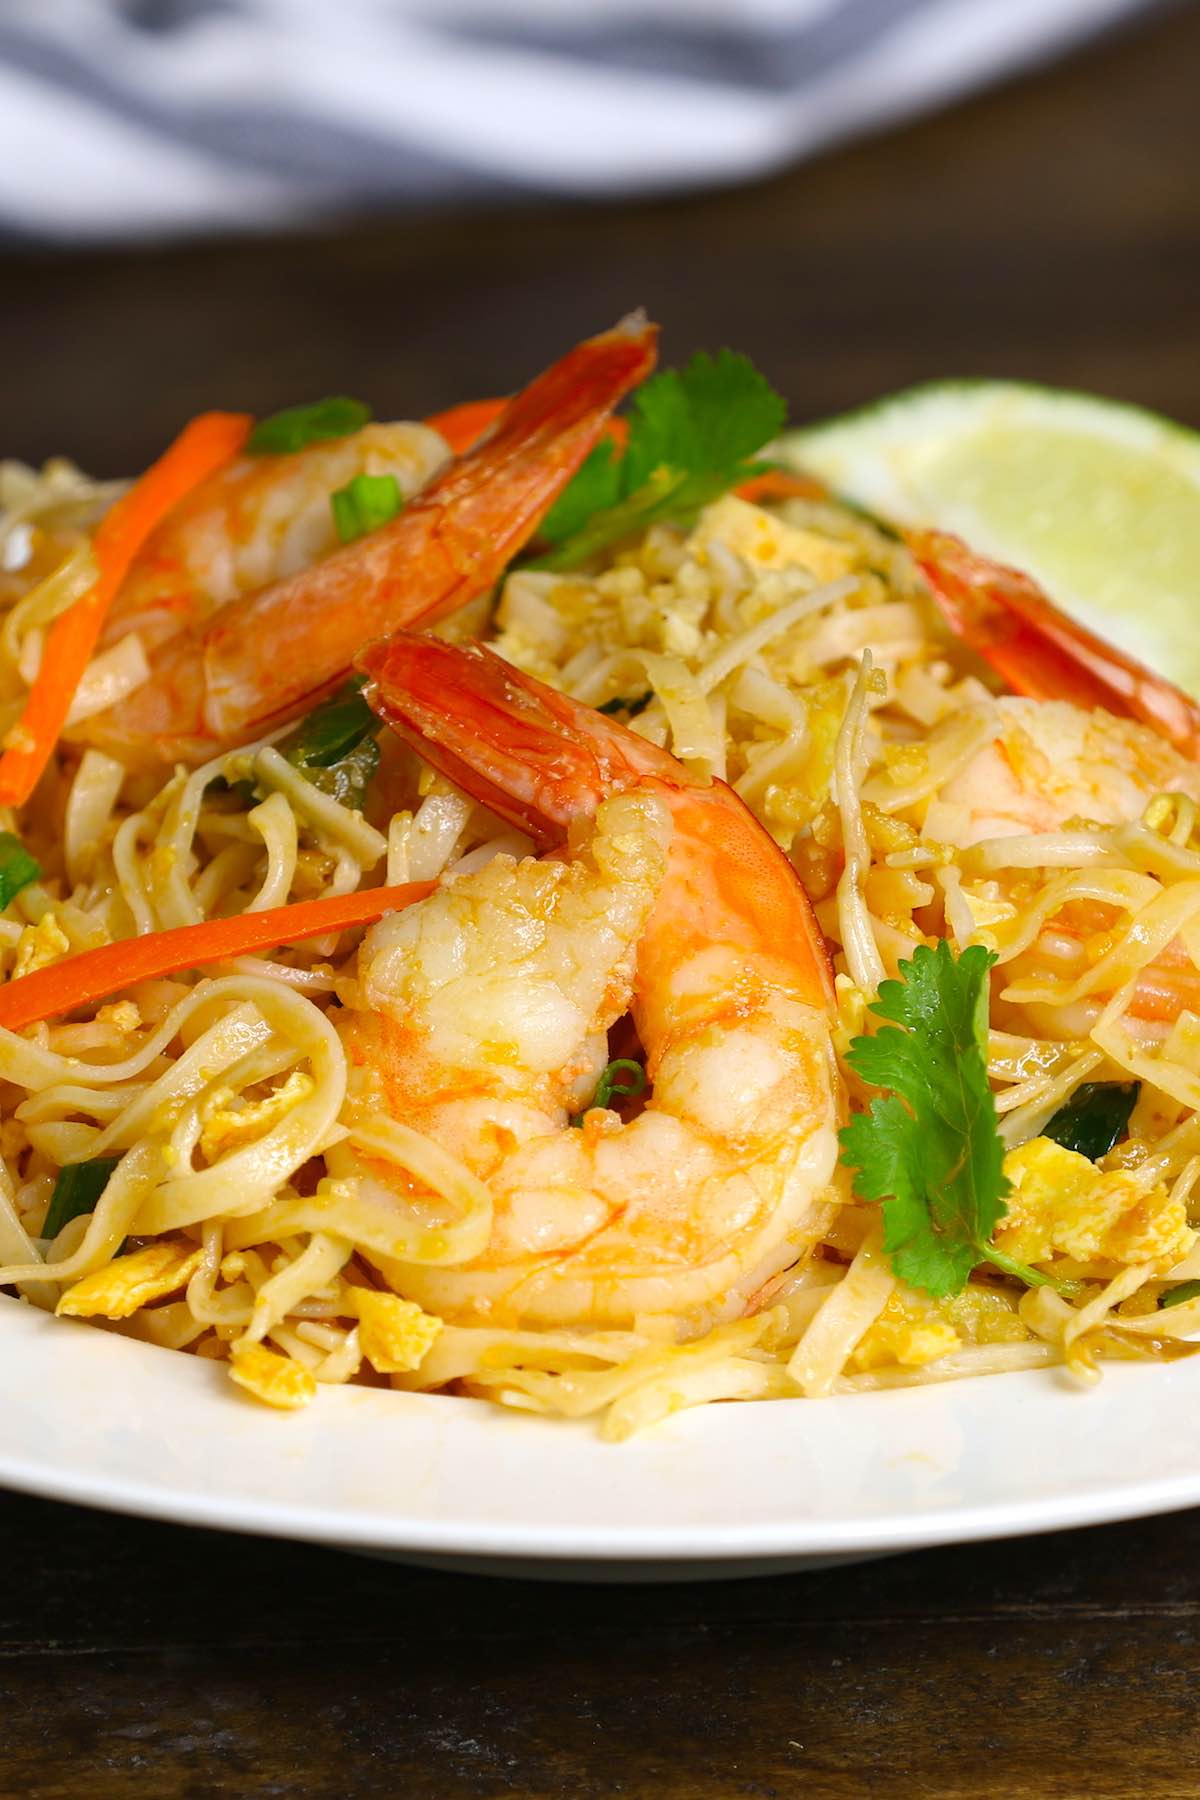 Shrimp Pad Thai is loaded with sweet, sour and spicy shrimp, mixed with rice noodles and vegetables. It’s so simple and easy to make. Try it once and you won’t want to go back to takeout! It comes together in only 20 minutes. 